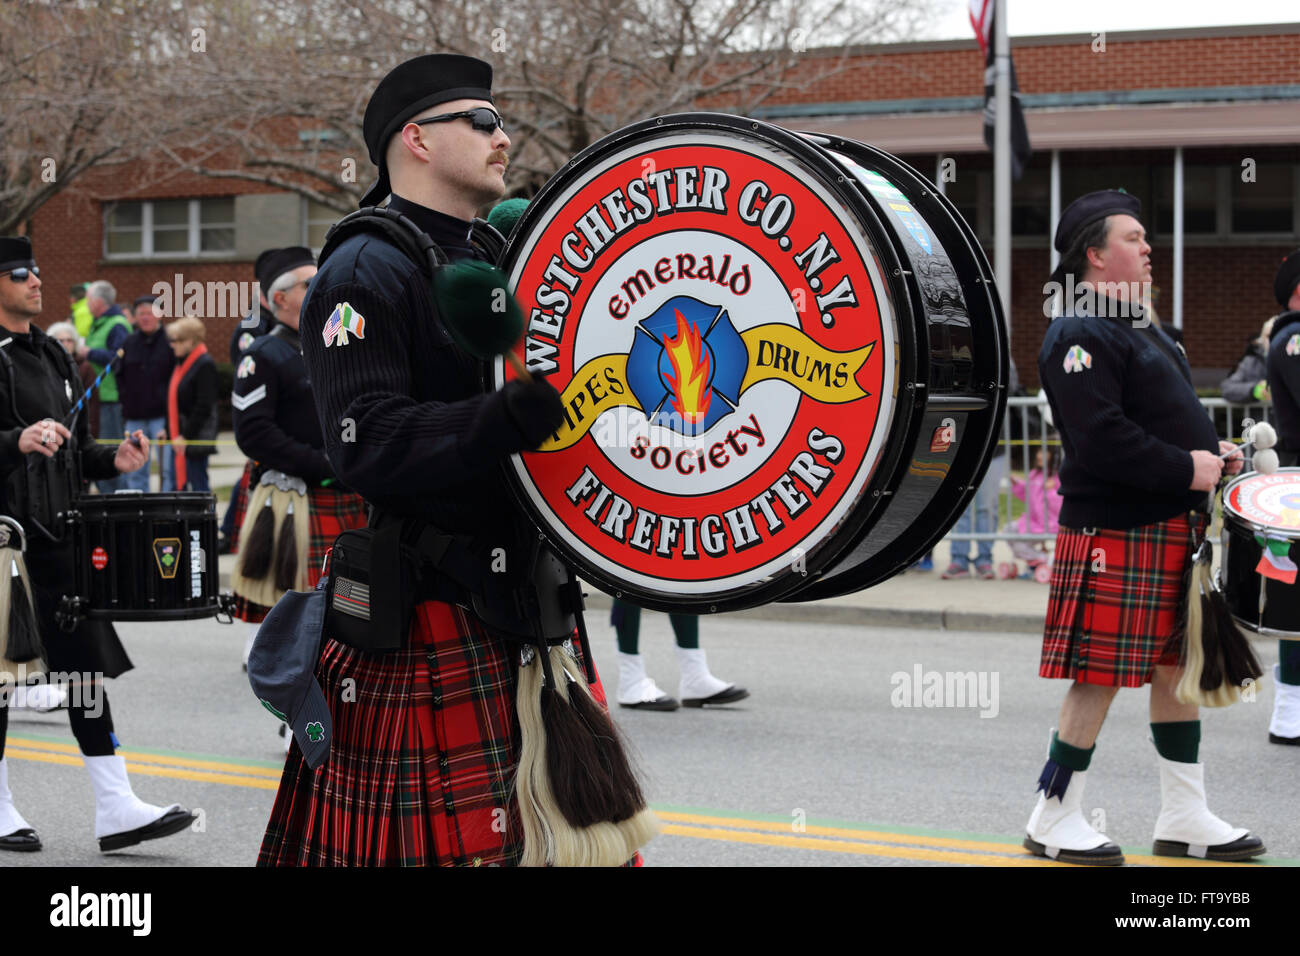 Pipes und Drums Band marschieren in St. Patricks Day parade Yonkers New York Stockfoto